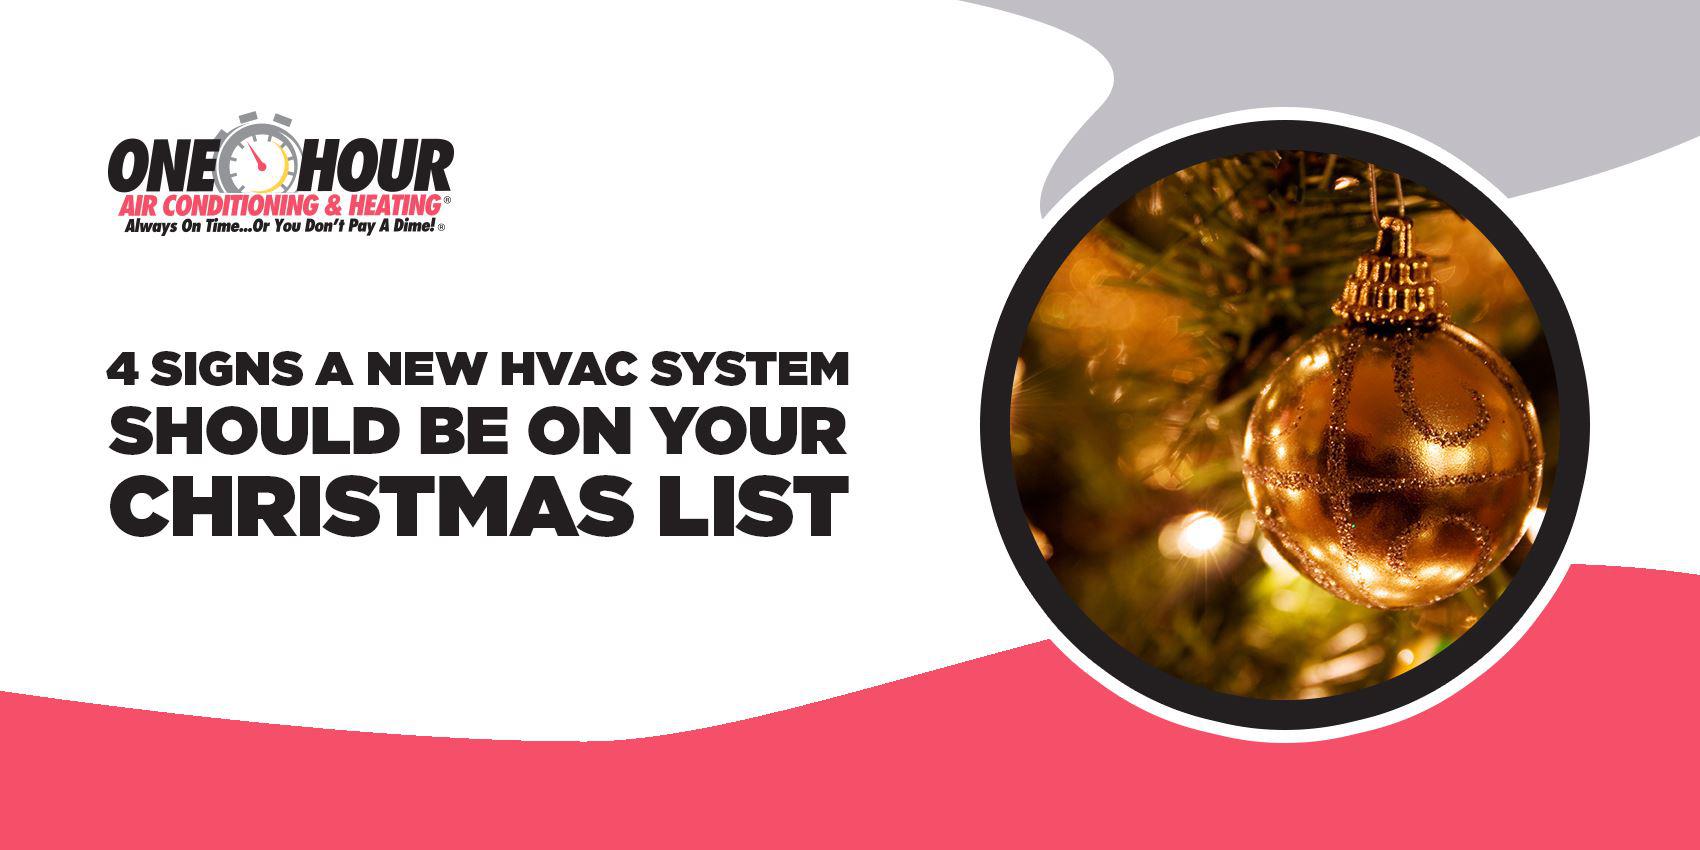 4 Signs a New HVAC System Should Be on Your Christmas List